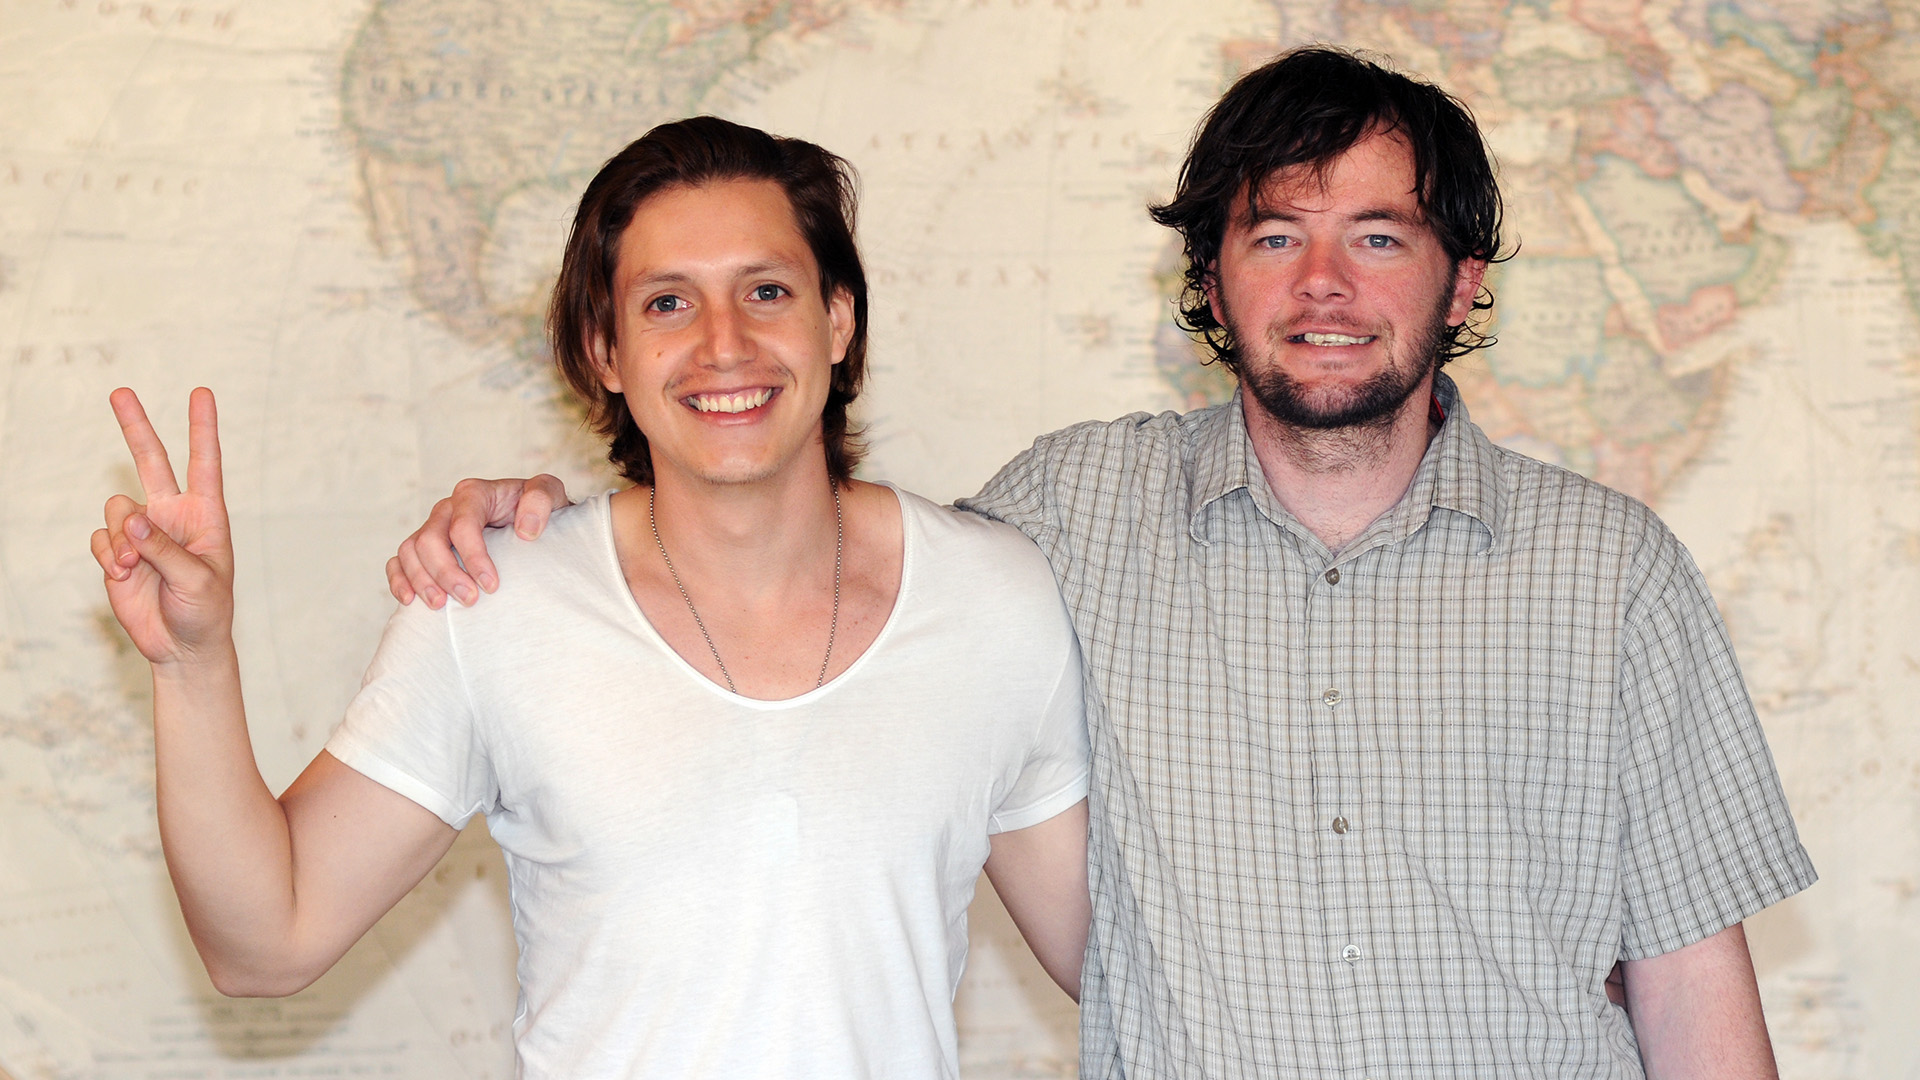 Christian and Matt standing together in front of a large world map